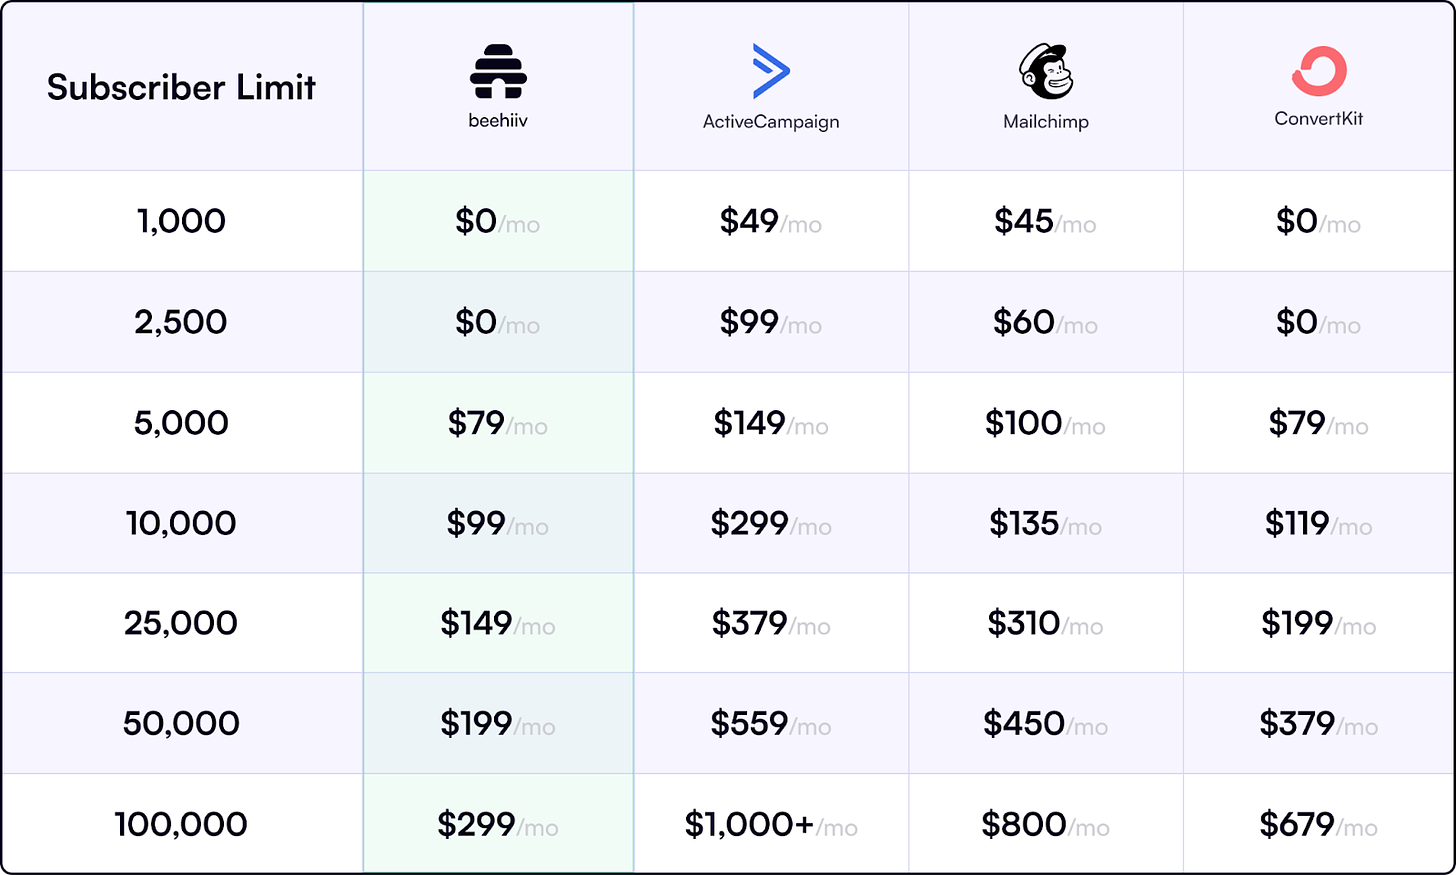 beehiiv pricing plans stacked against competitors